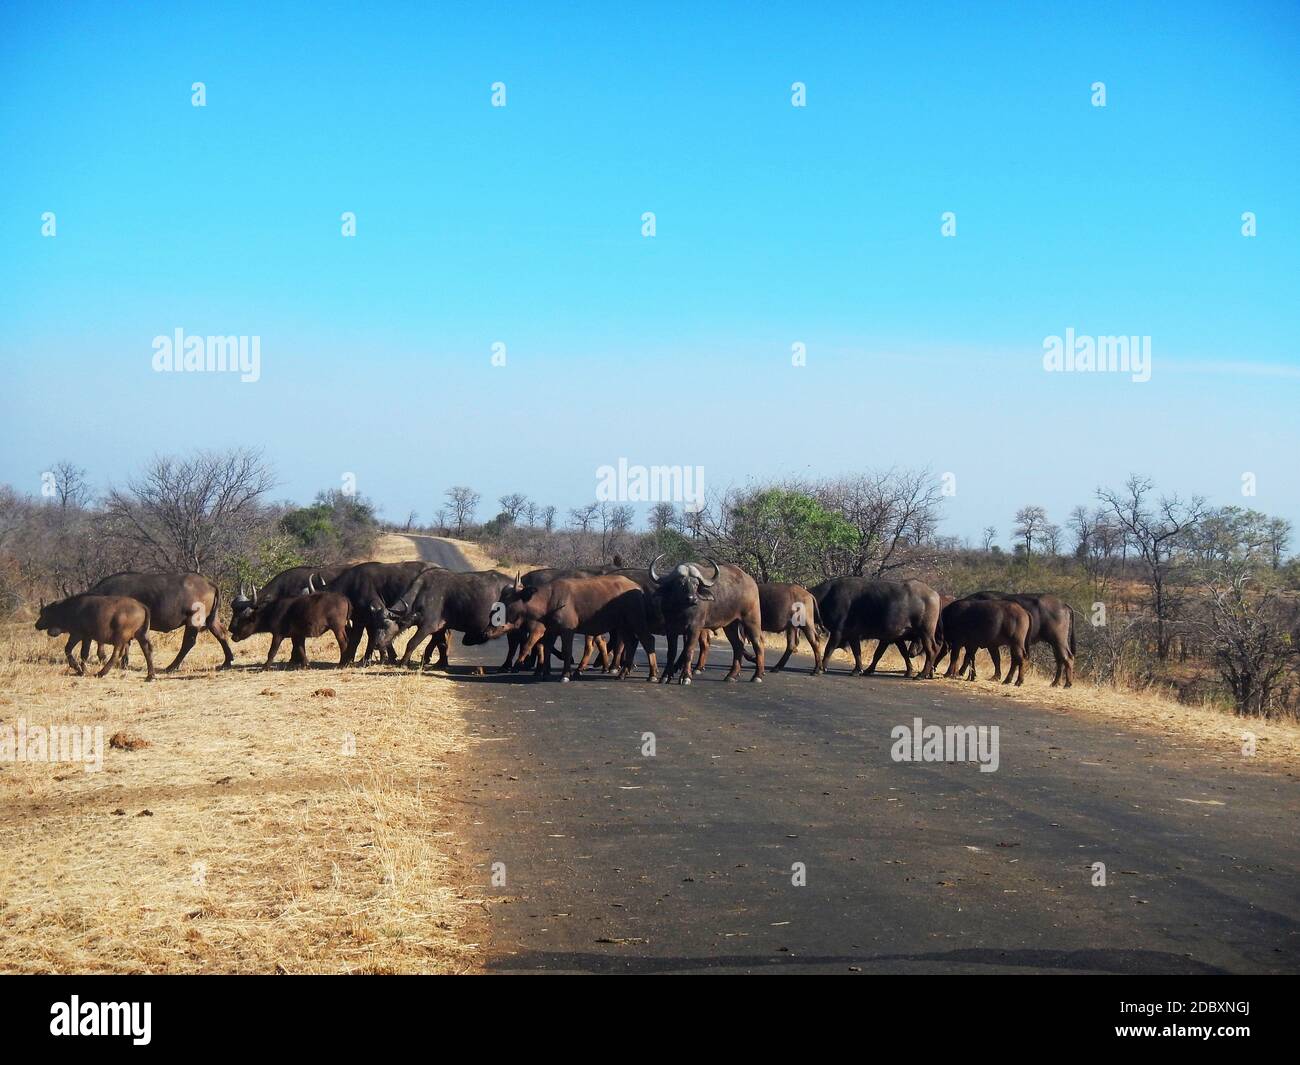 Buffalo herd in the Kruger National Park in South Africa Stock Photo